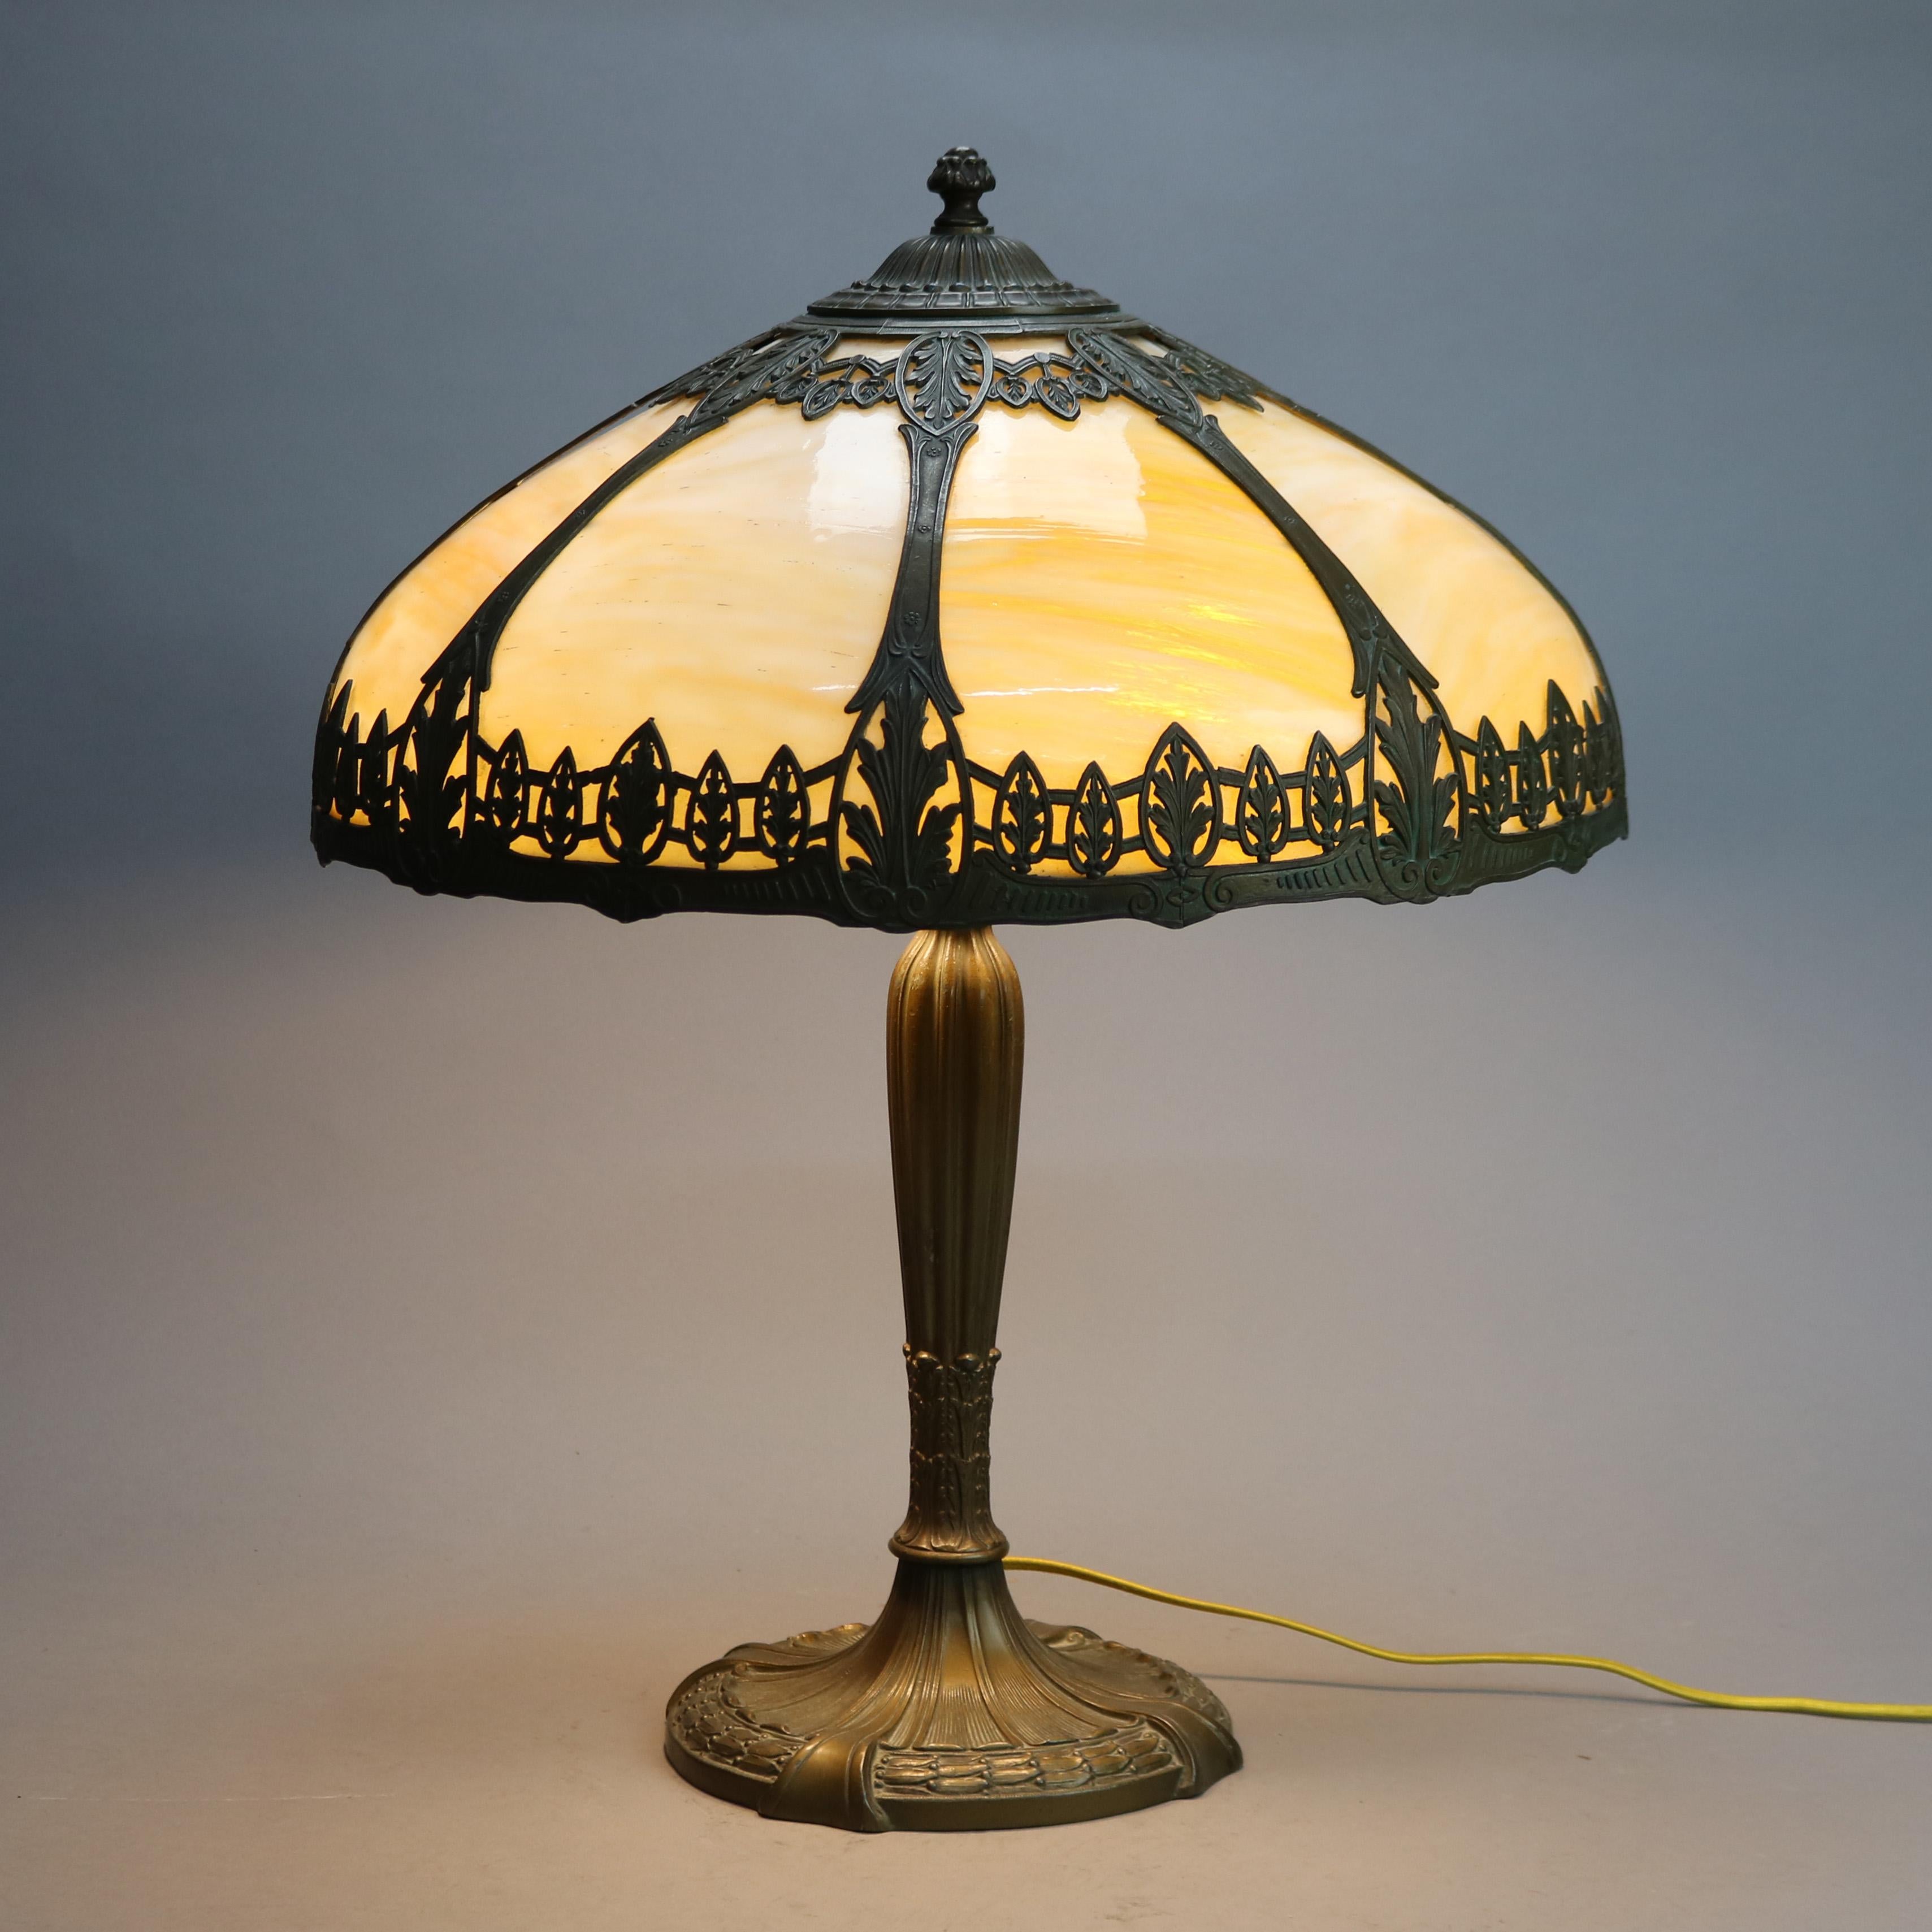 An antique Arts and Crafts table lamp by Royal Art Glass Co offers dome shade with cast filigree frame having stylized foliate elements and housing eight curved slag glass panels, over cast double socket base, maker mark on base as photographed,